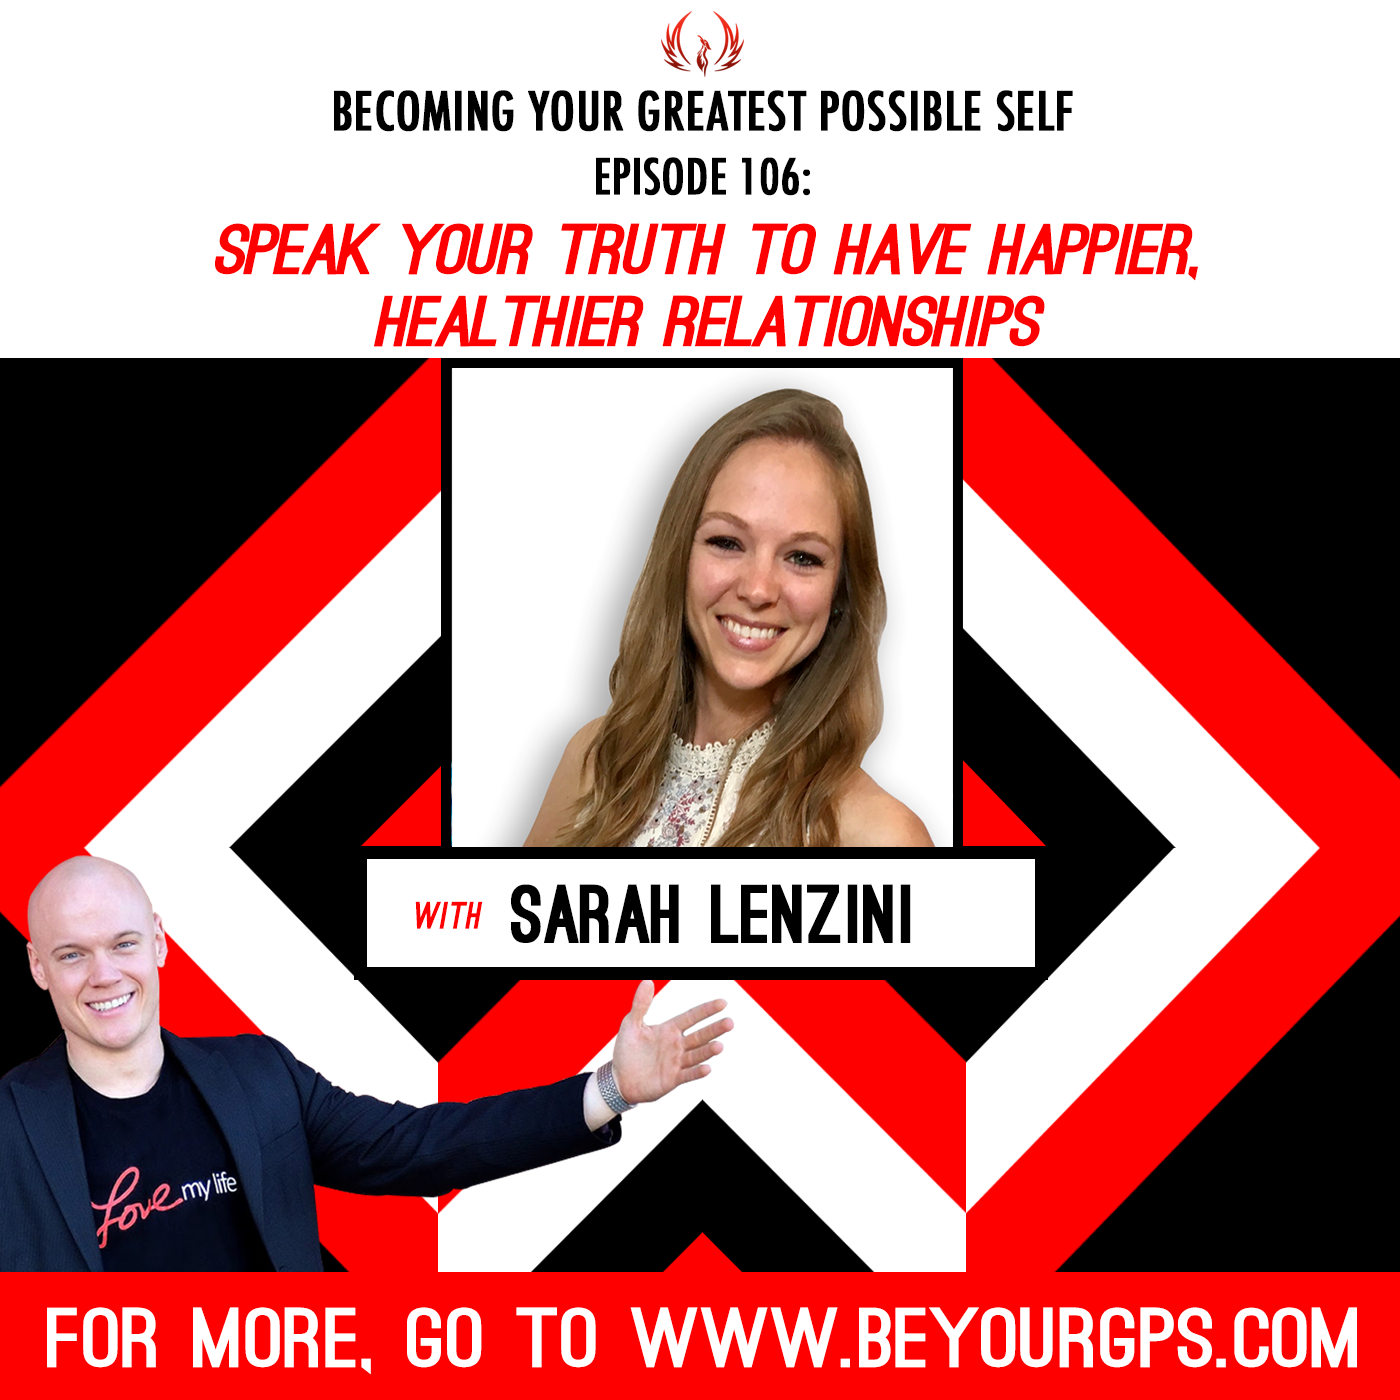 Speak Your Truth To Have Happier, Healthier Relationships with Sarah Lenzini